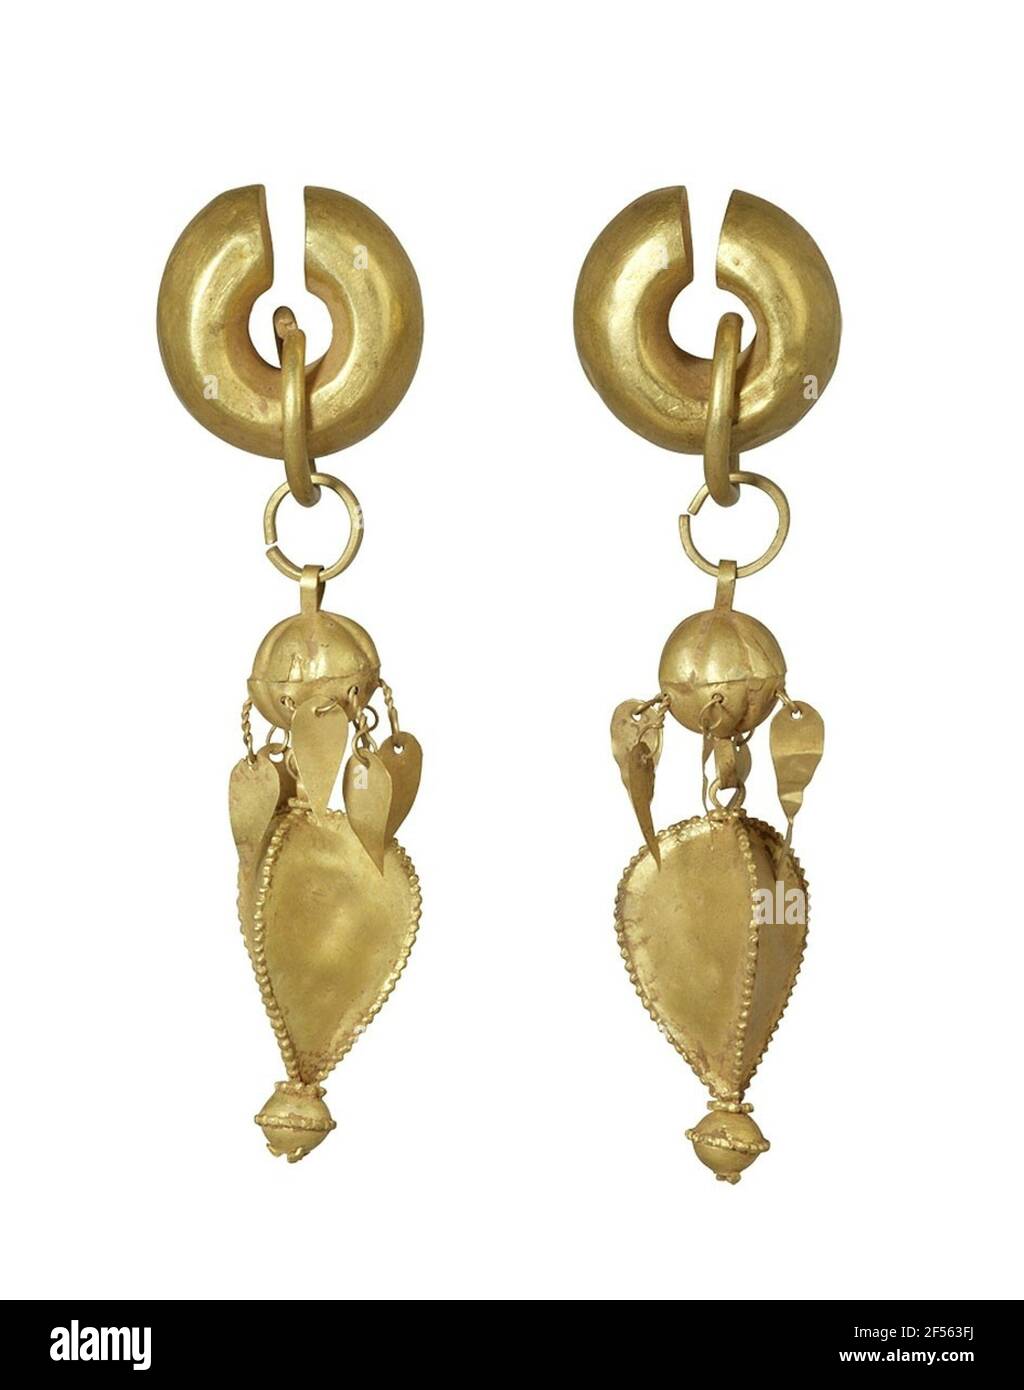 Ear or crown hangings. This earrings comes from a Korean grave from the time between the 5th and 6th century, the so-called Silla Dynasty (57 BC-935 N.Ch.). The rulers and noble families were buried with golden crowns, chains, rings and ears like this as a status symbol. The ear jewelery is hollow made of gold plate and resembles in the lower part of the form of bookgeres. Gift by Ryun Namkoong, Seoul Stock Photo